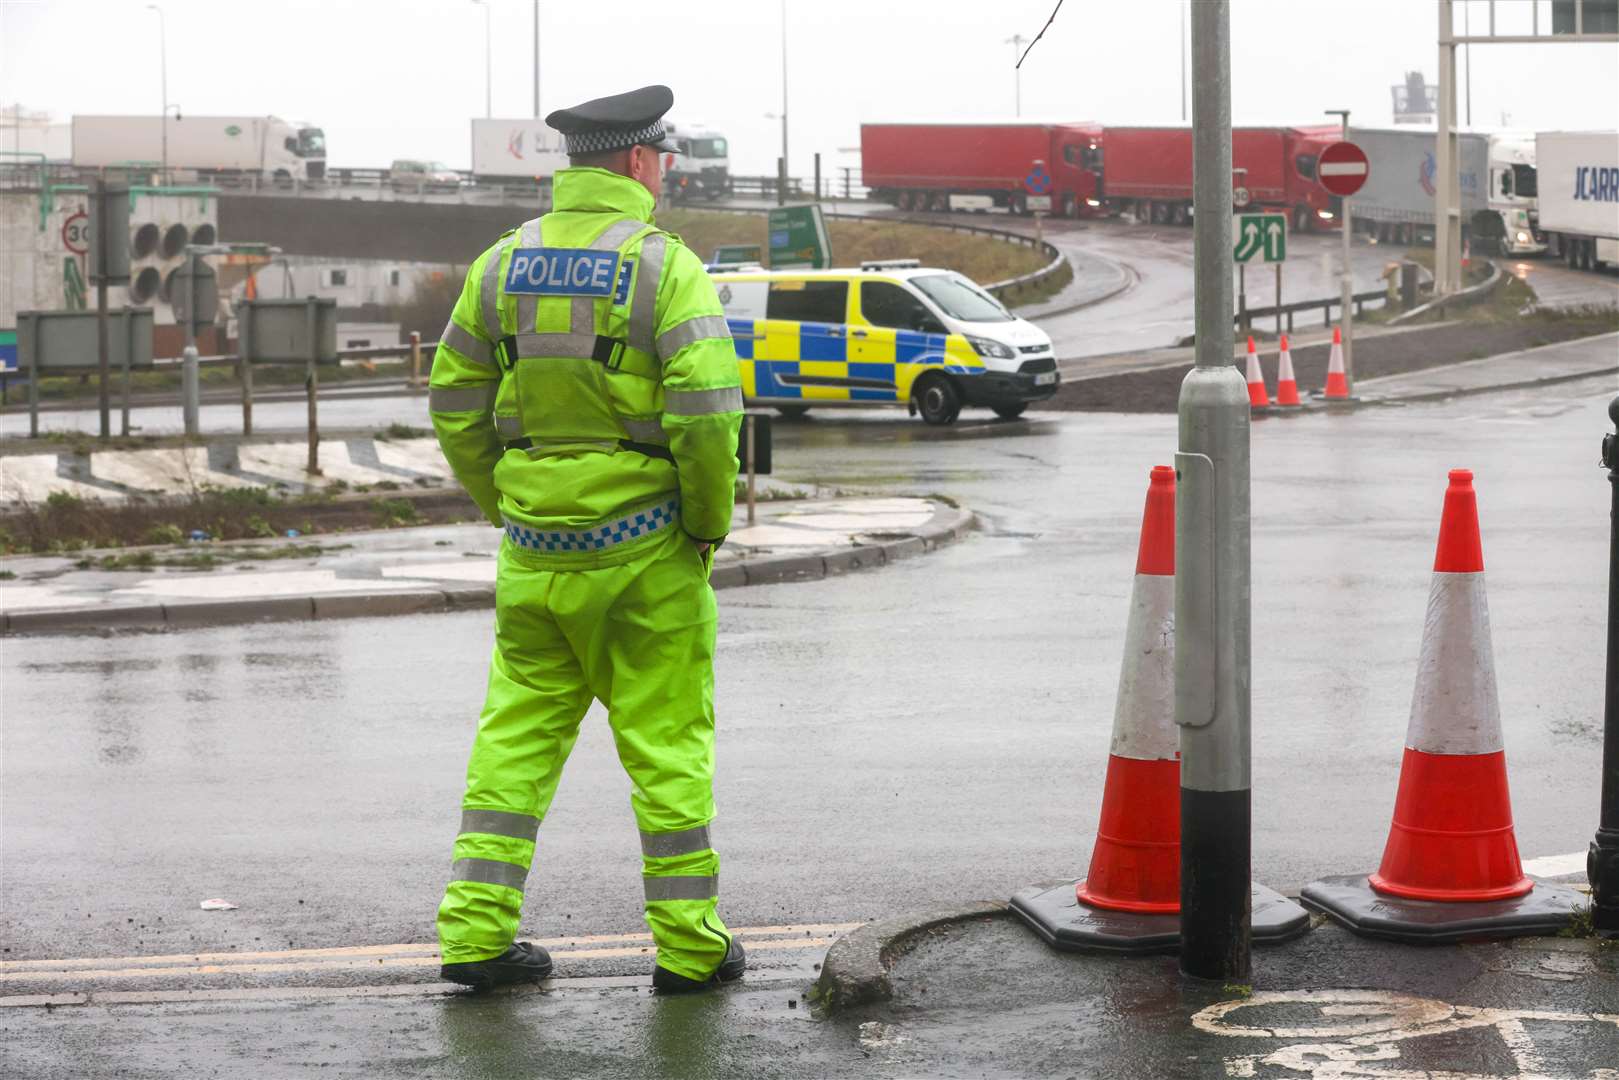 Police at the entrance to the Port of Dover, ready to manage traffic. Picture: UKNIP